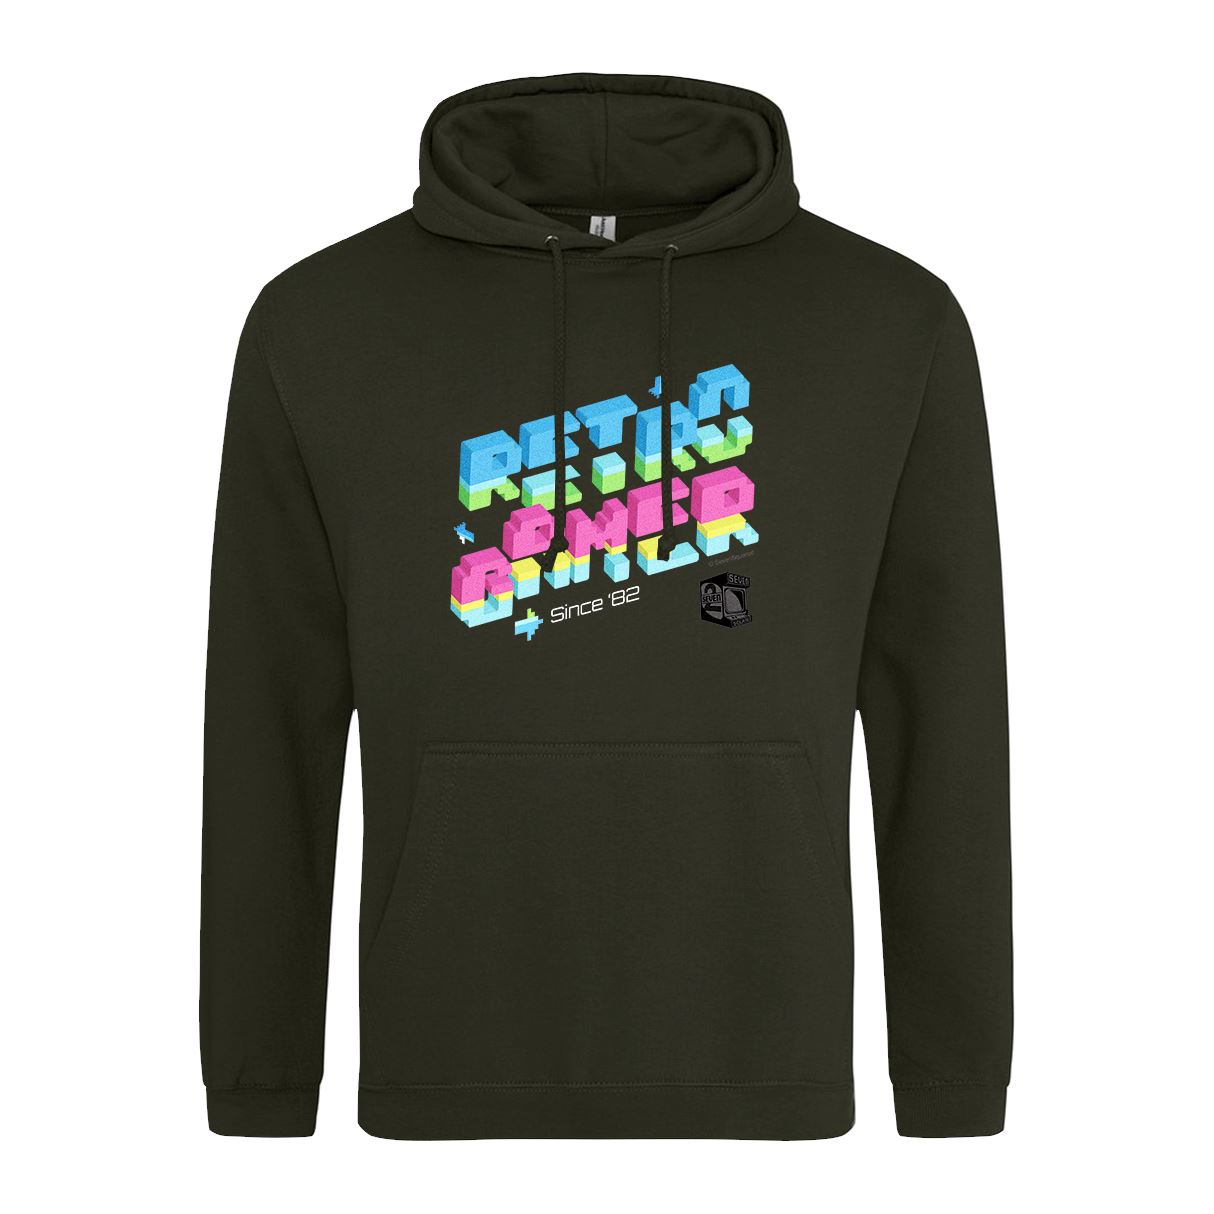 Retro Gamer Since '82 Hoodie Hoodie Seven Squared Small 36" Chest Combat Green 